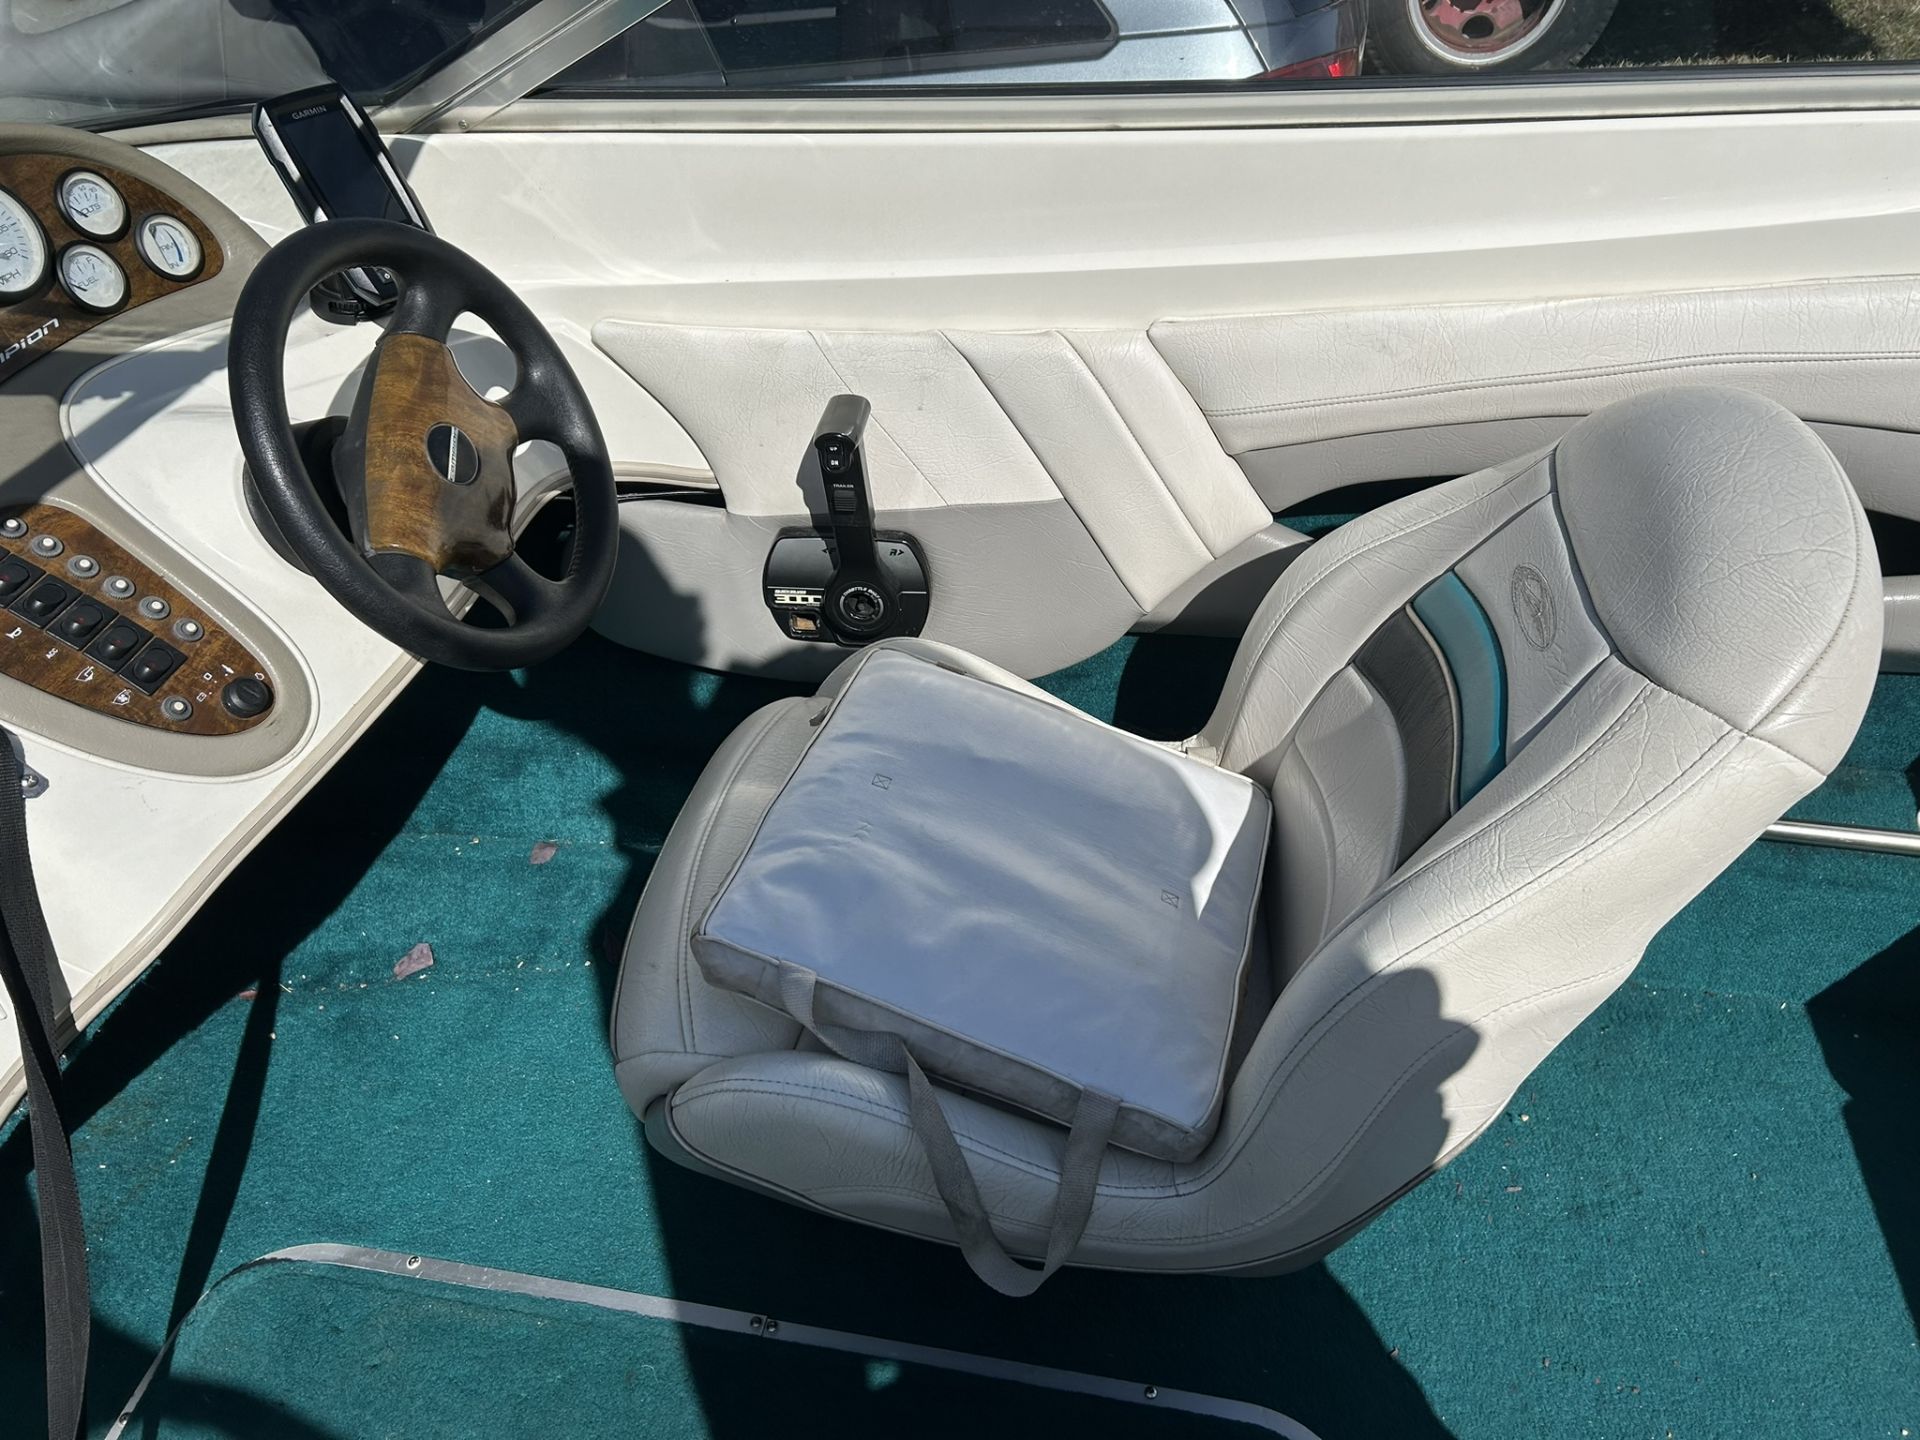 1998 CAMPION ALLANTE INBOARD MOTOR BOAT, W/ MERCRUSIER ALPHA ONE 5.7 LITRE ENG. S/N ZB1S6576F798 & - Image 7 of 12